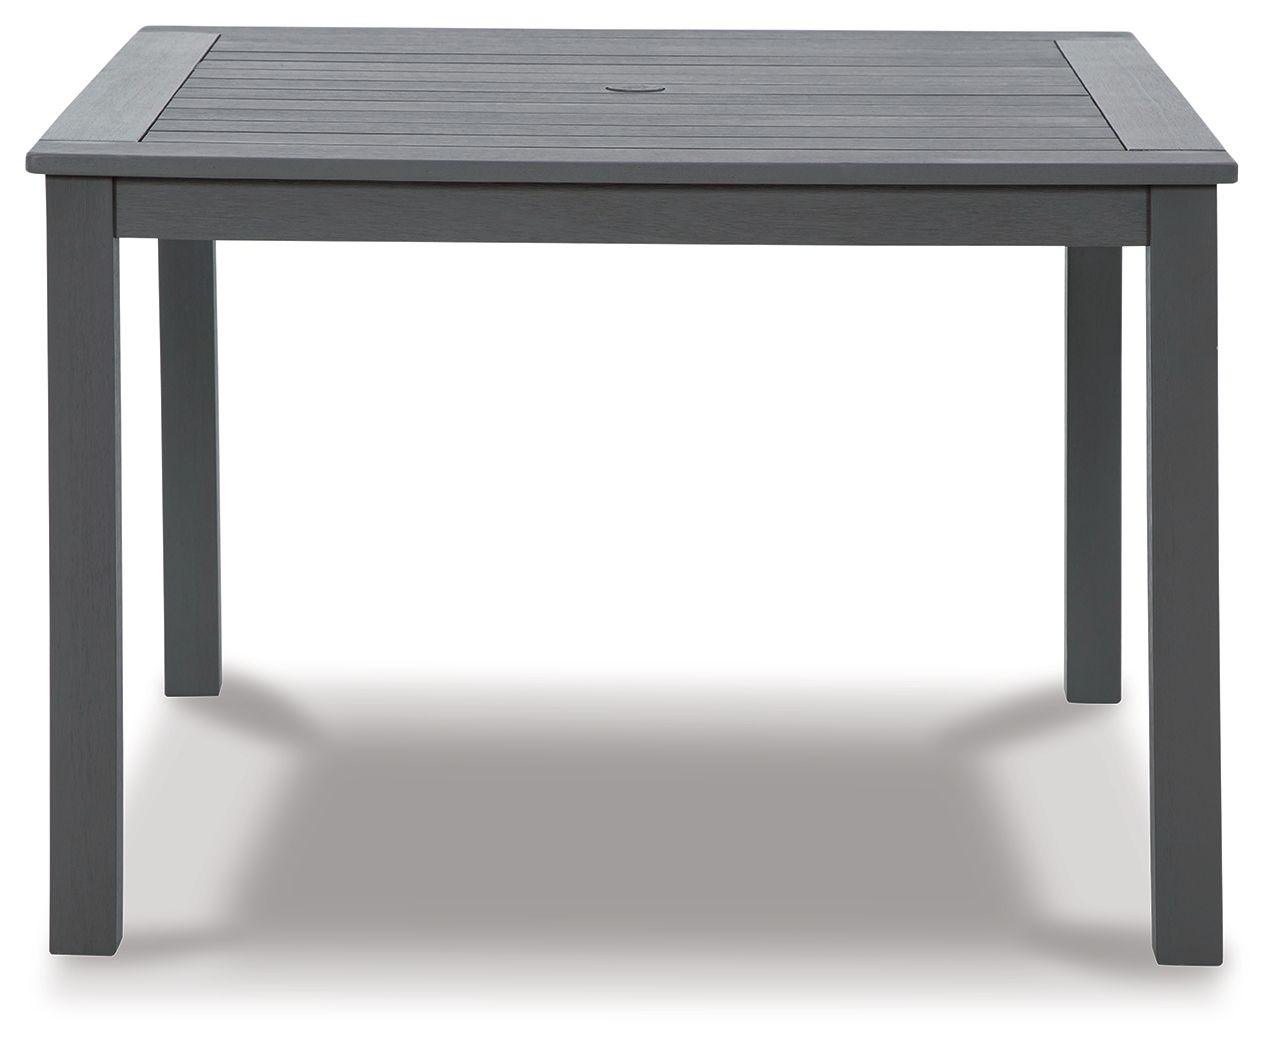 Eden Town - Gray - Square Dining Table W/Umb Opt Tony's Home Furnishings Furniture. Beds. Dressers. Sofas.